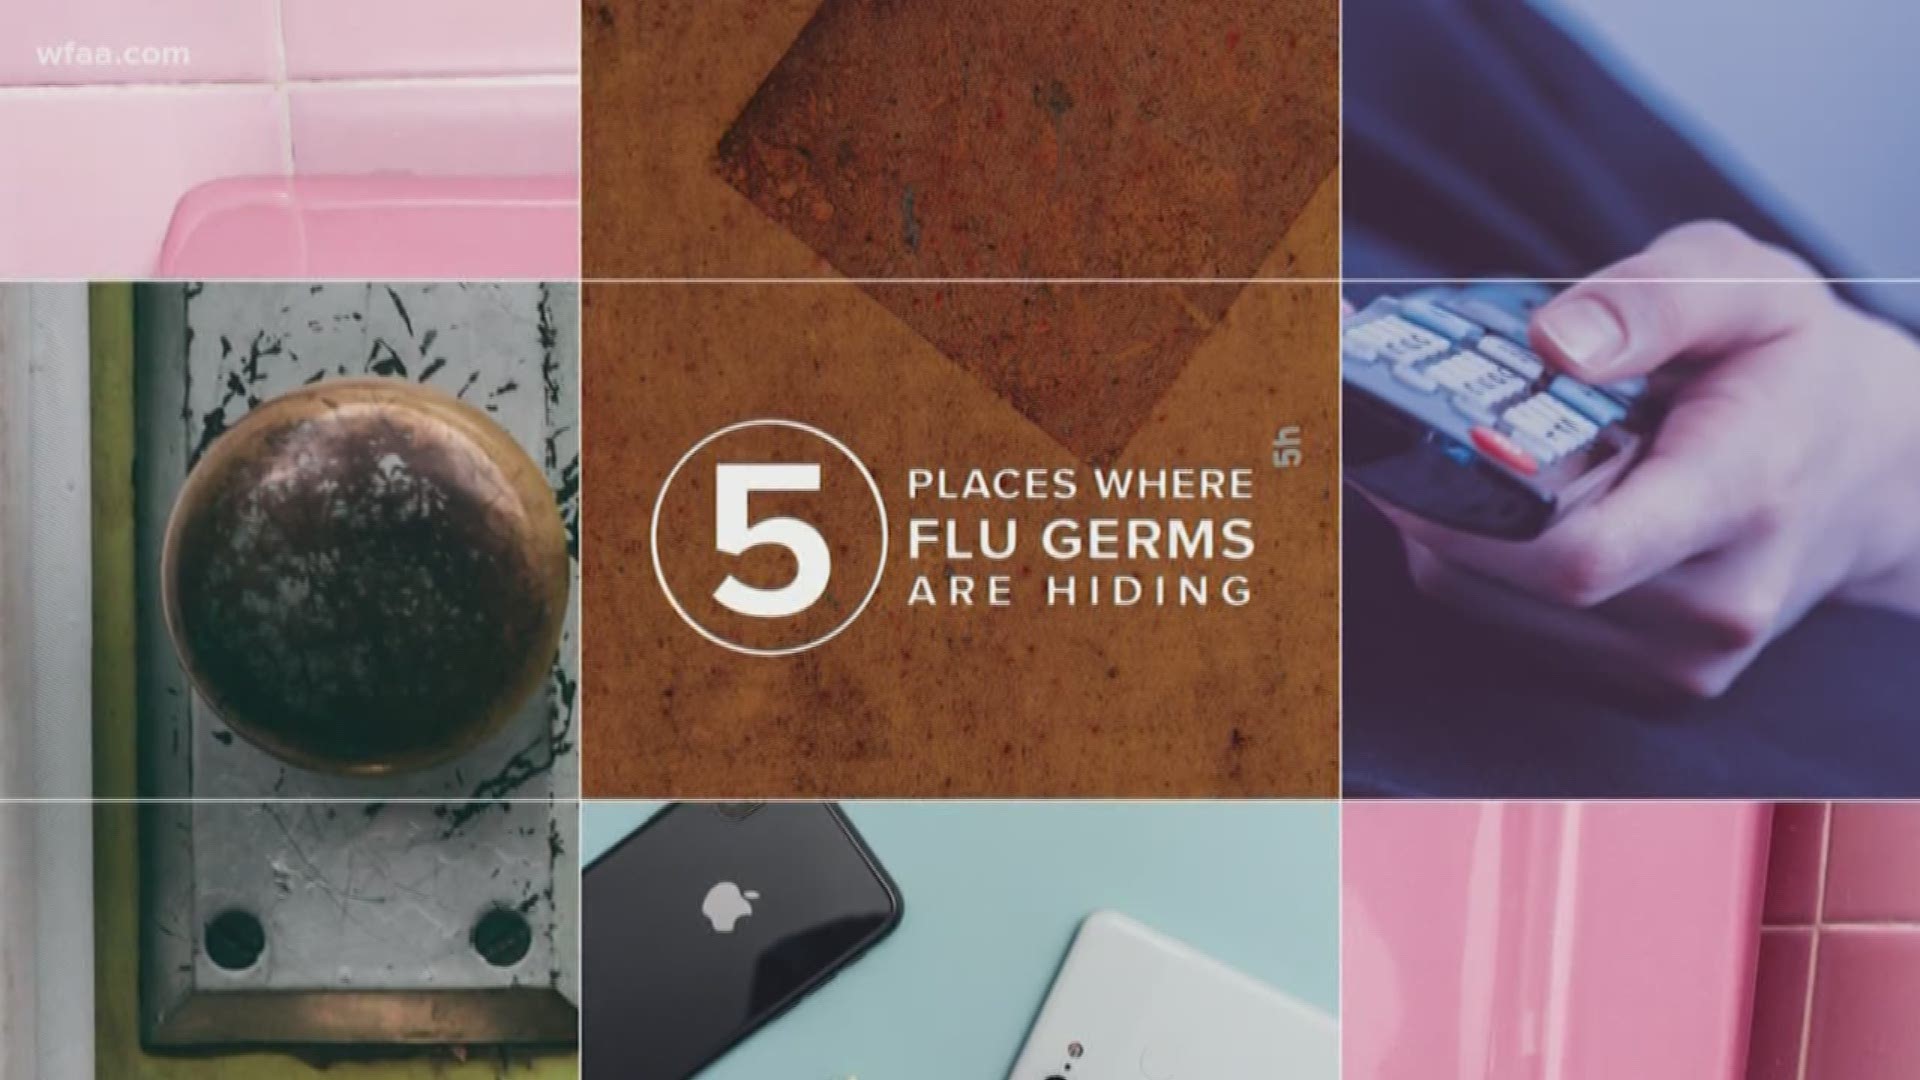 The 2019-2020 flu season has been a particularly bad one. So, you need to take care of yourself and be aware of what you can do.